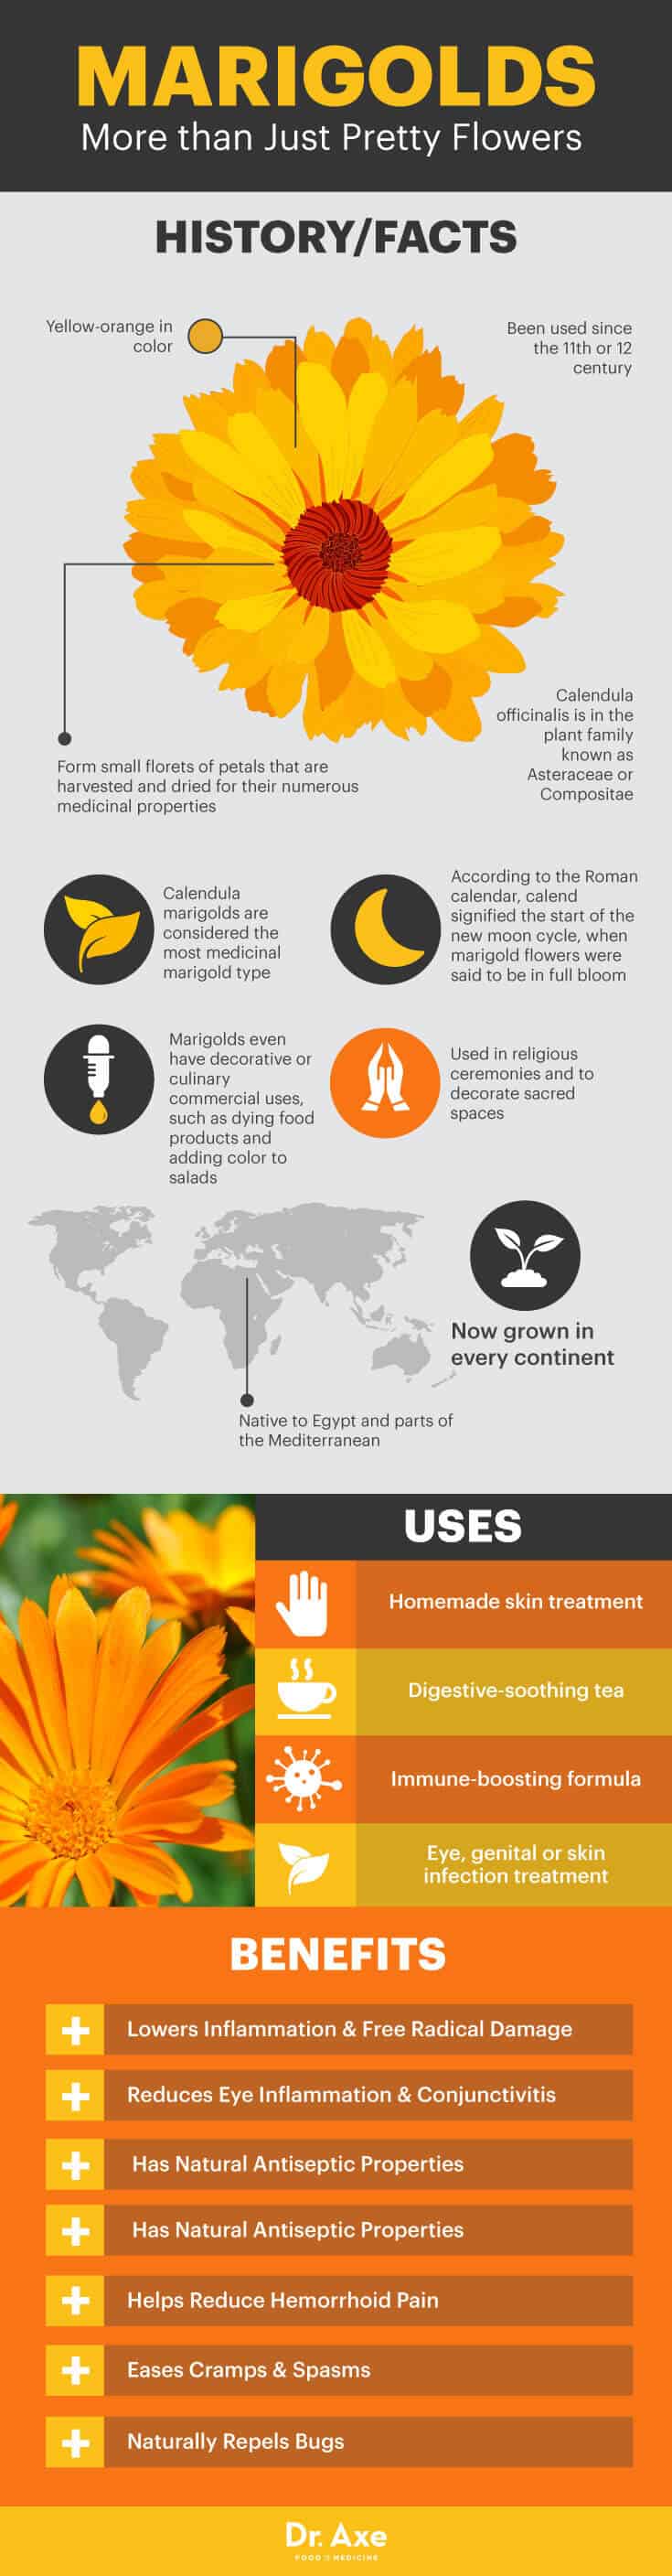 Top 11 Uses Benefits Of Marigolds Including For The Skin Eyes More Get Collagen Supplements South Africa